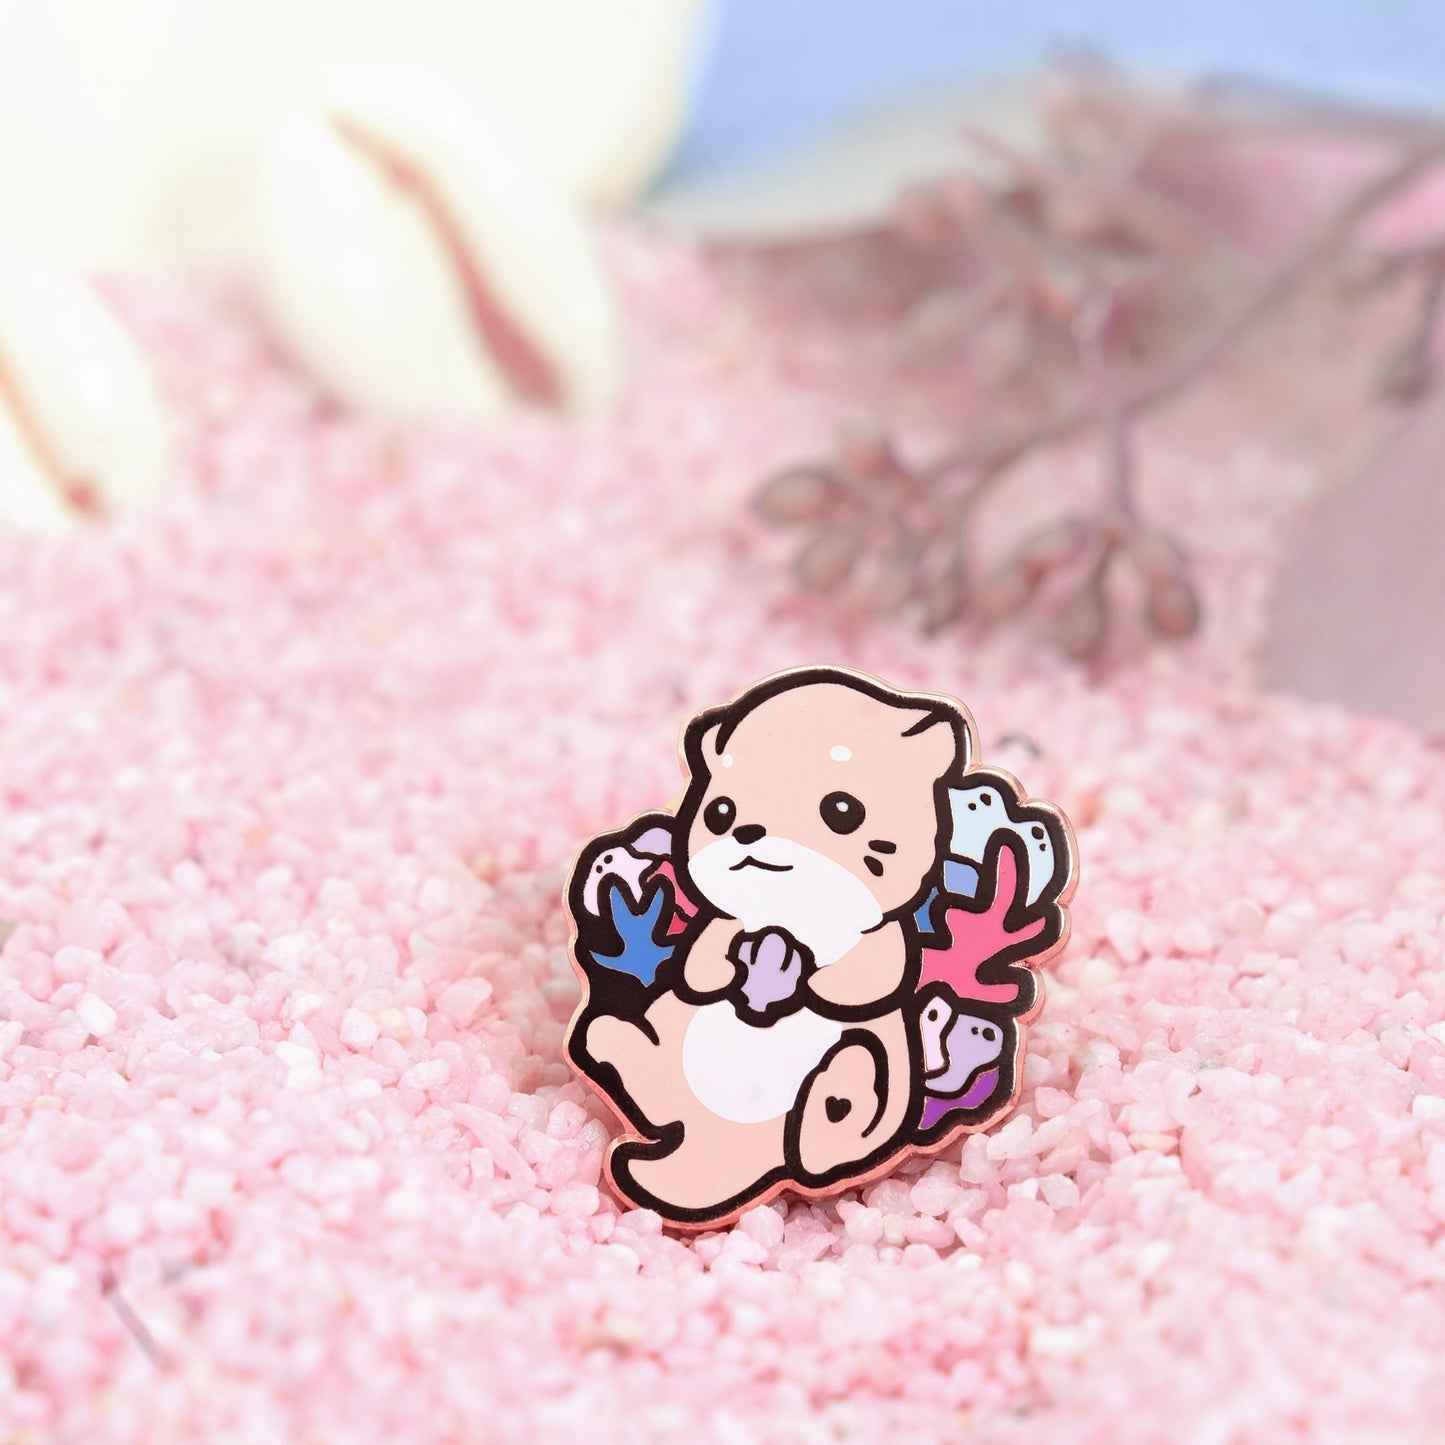 Cute Otter Pin | Mink Collectors Hard Enamel Pin Badge | Kawaii Aesthetic Birthday Gift for Her | Christmas Present Active